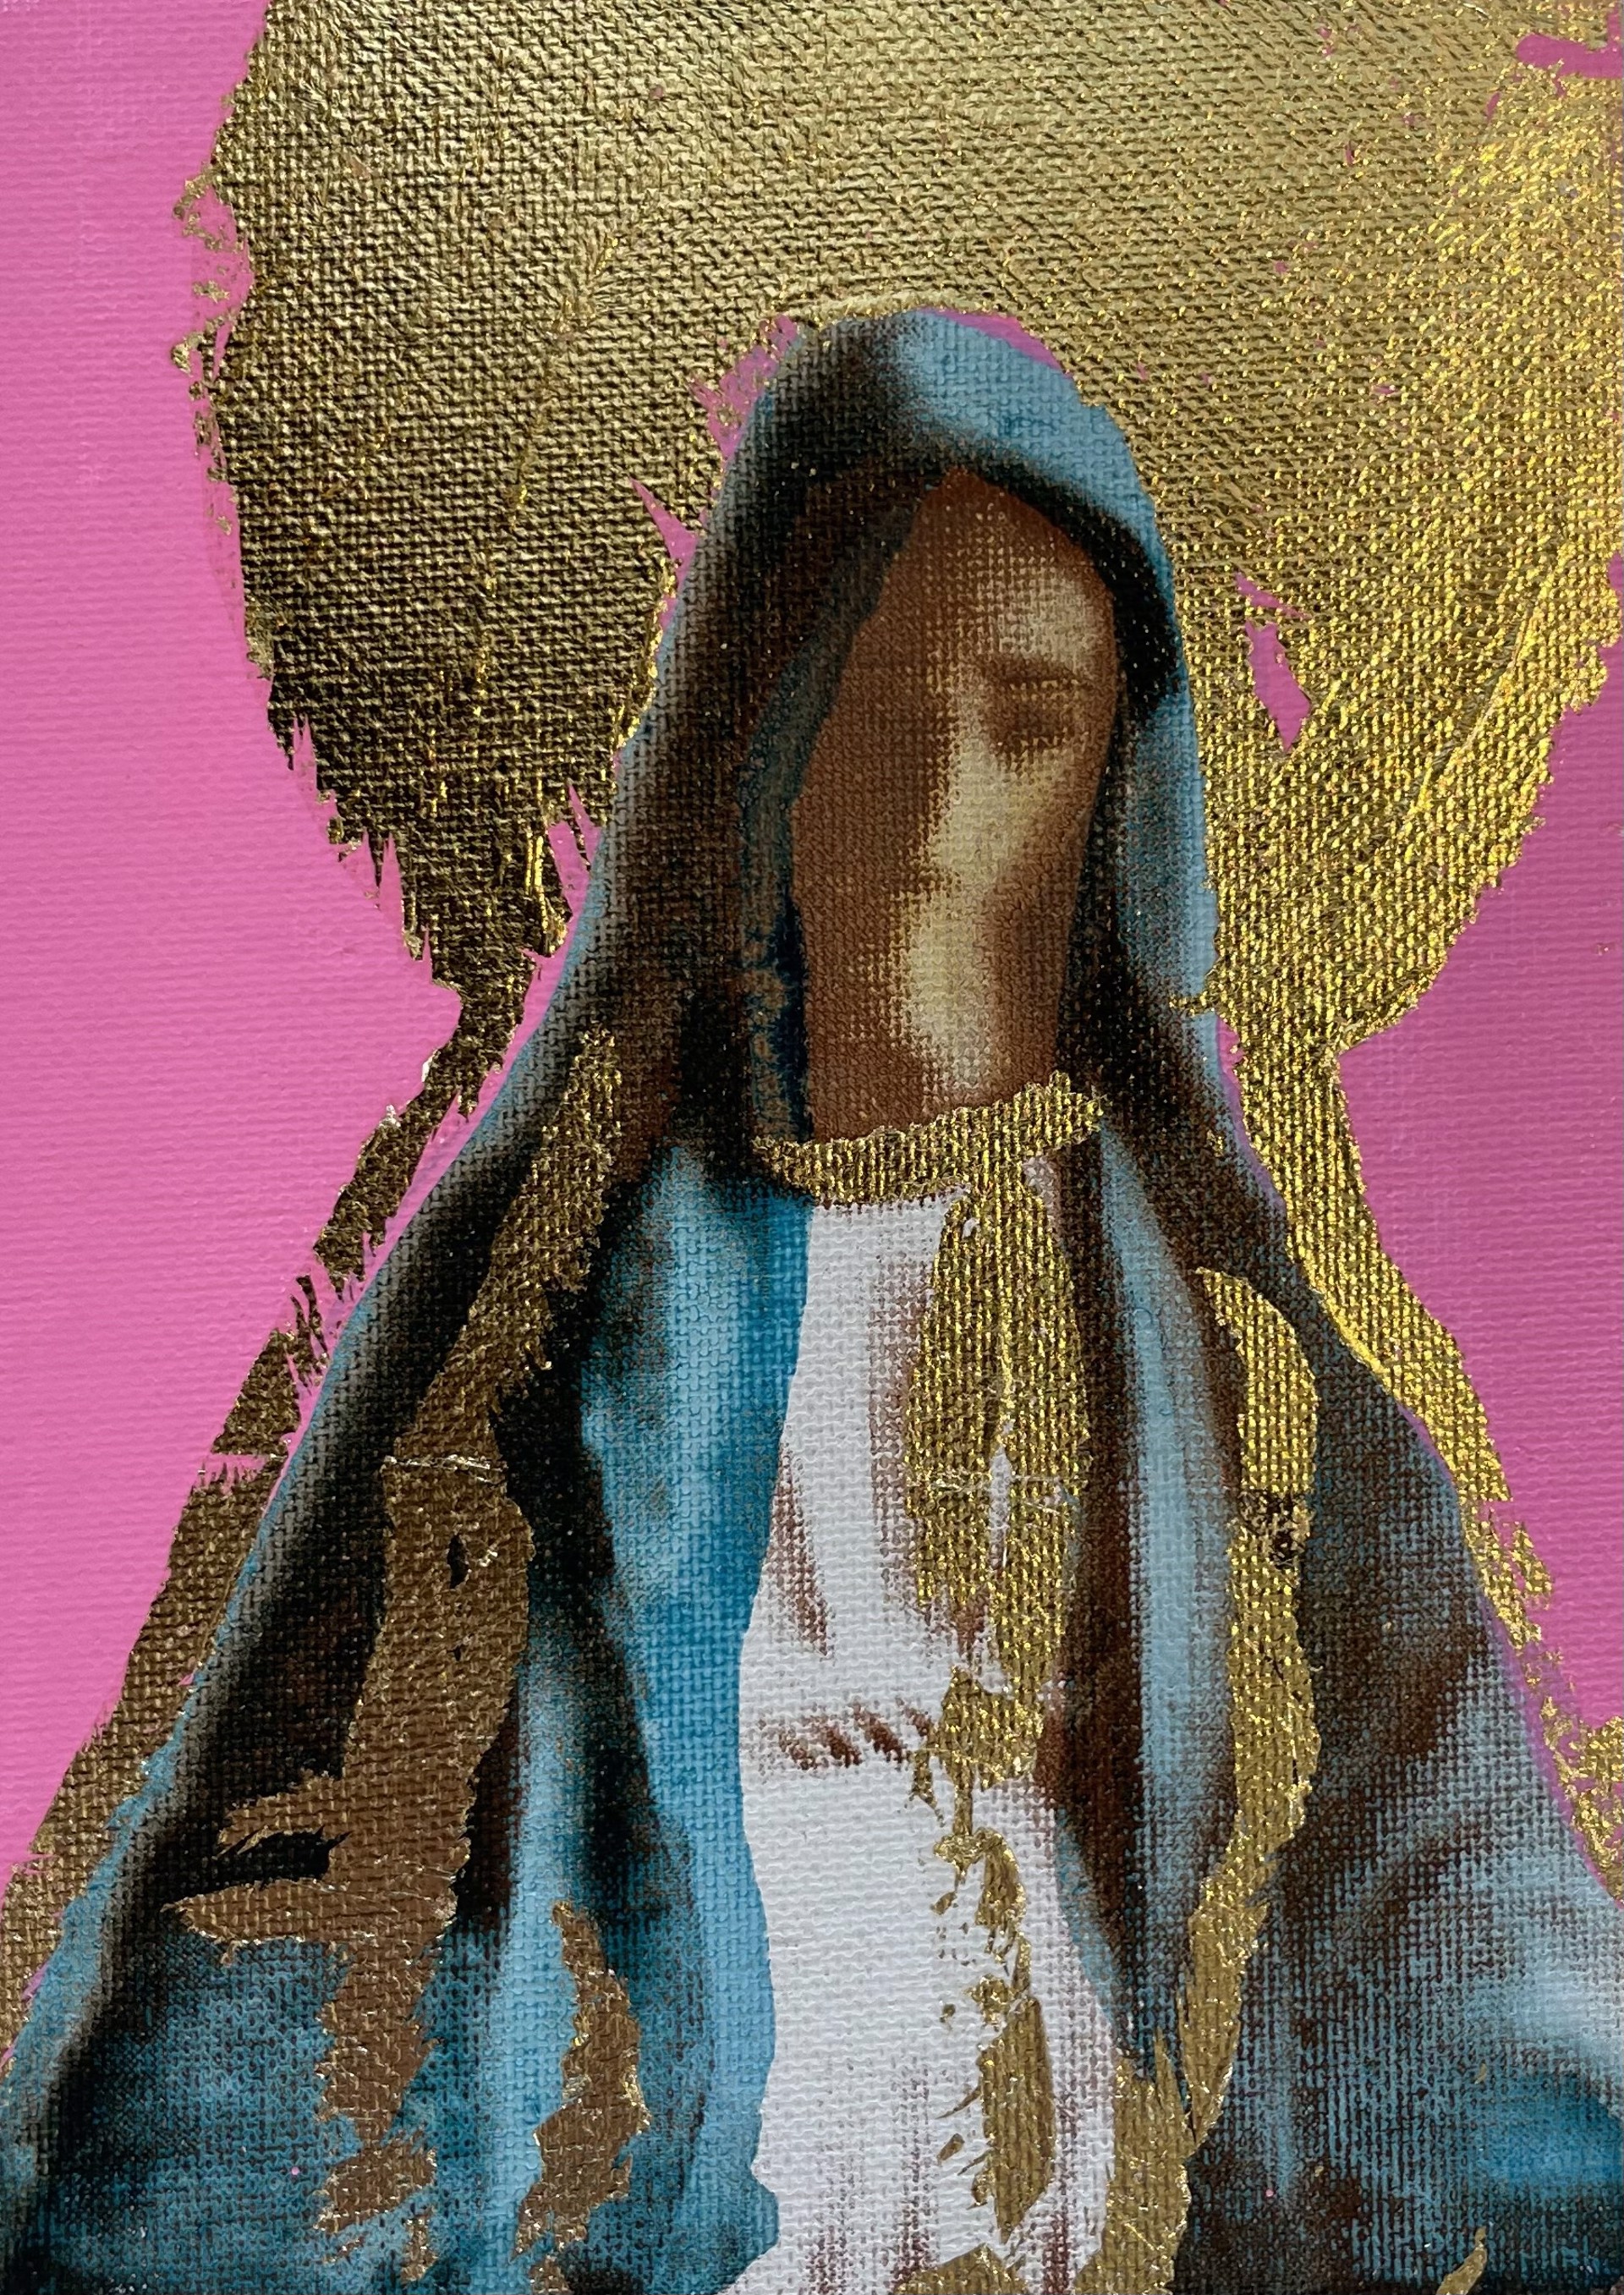 Hail Mary 6 by Megan Coonelly